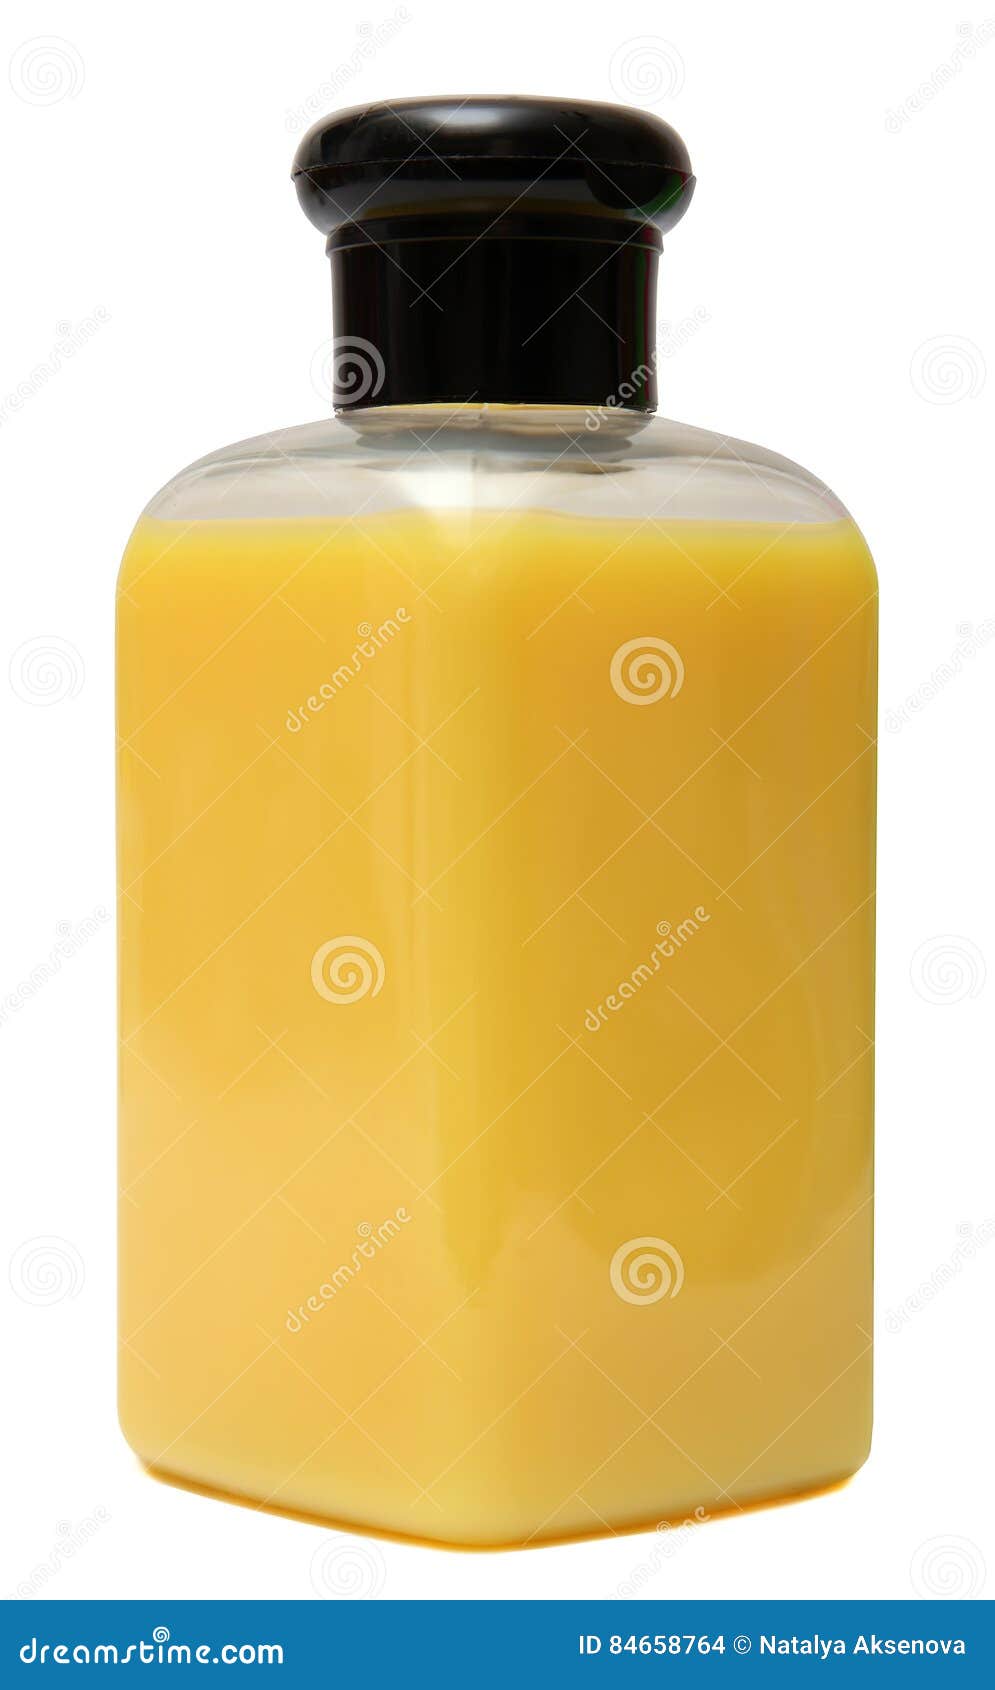 closed cosmetic or hygiene plastic bottle of gel, liquid soap, lotion, cream, shampoo.  on white background.